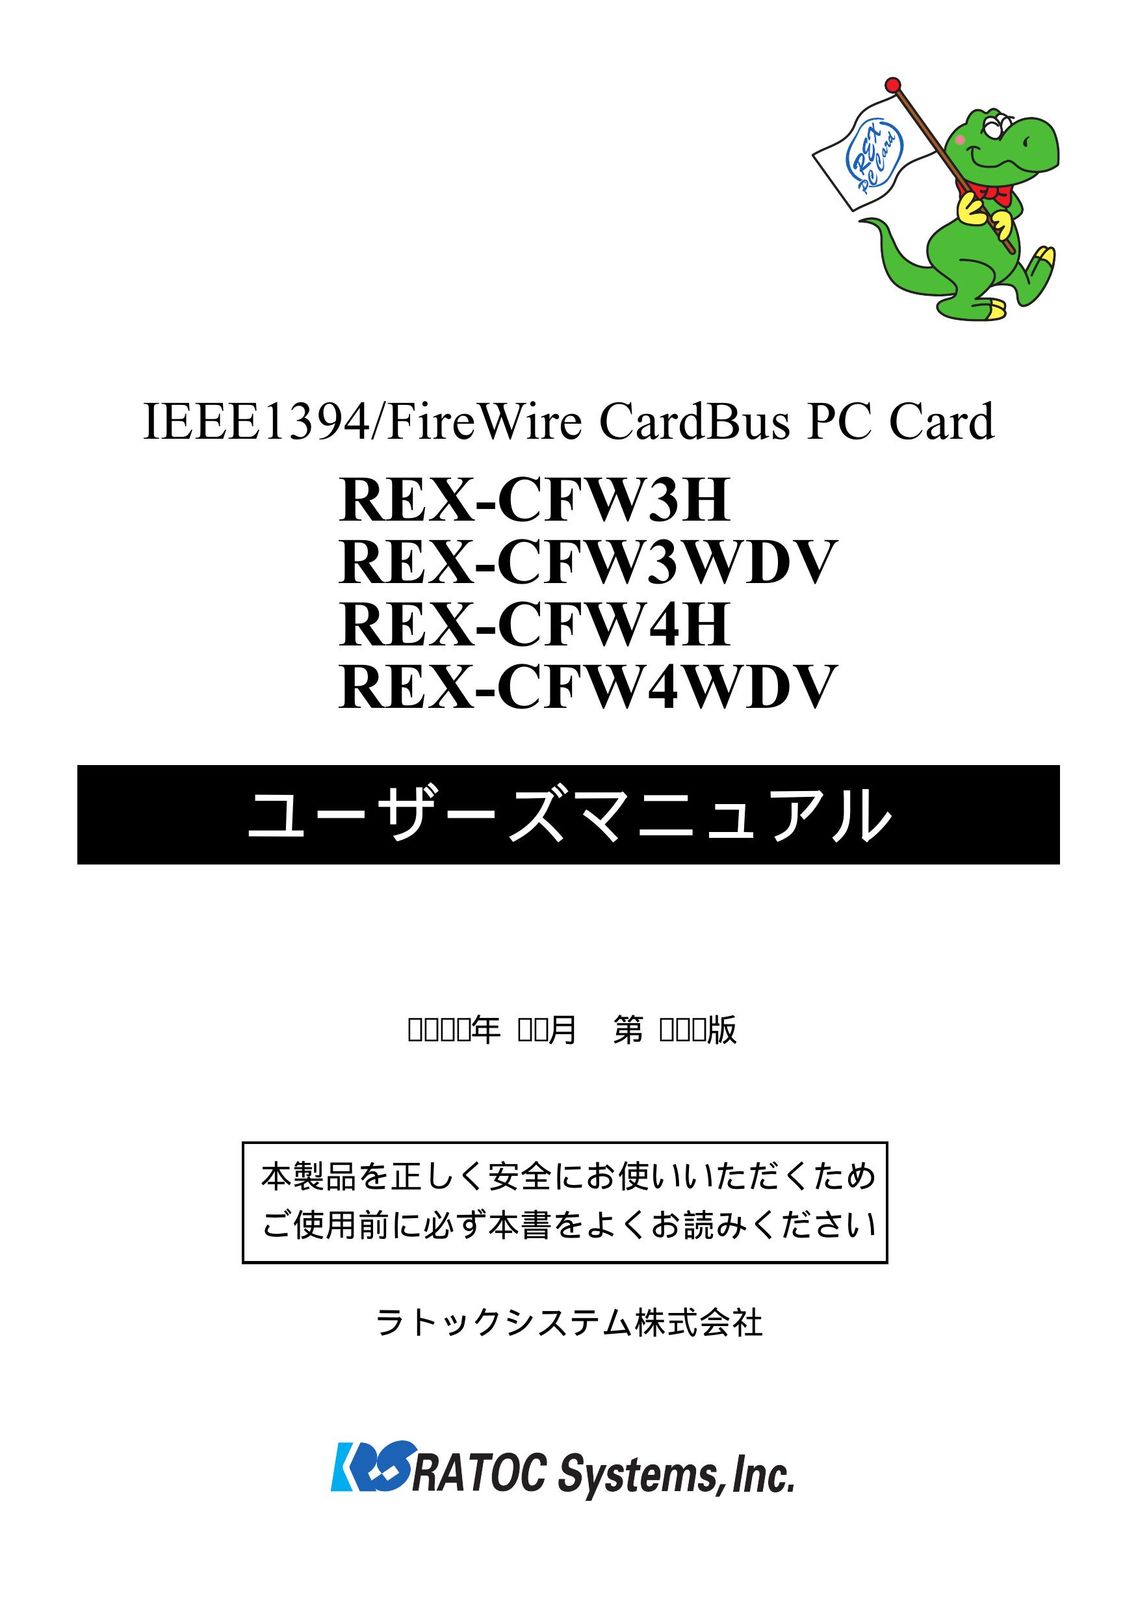 Ratoc Systems REX-CFW4WDV Network Card User Manual